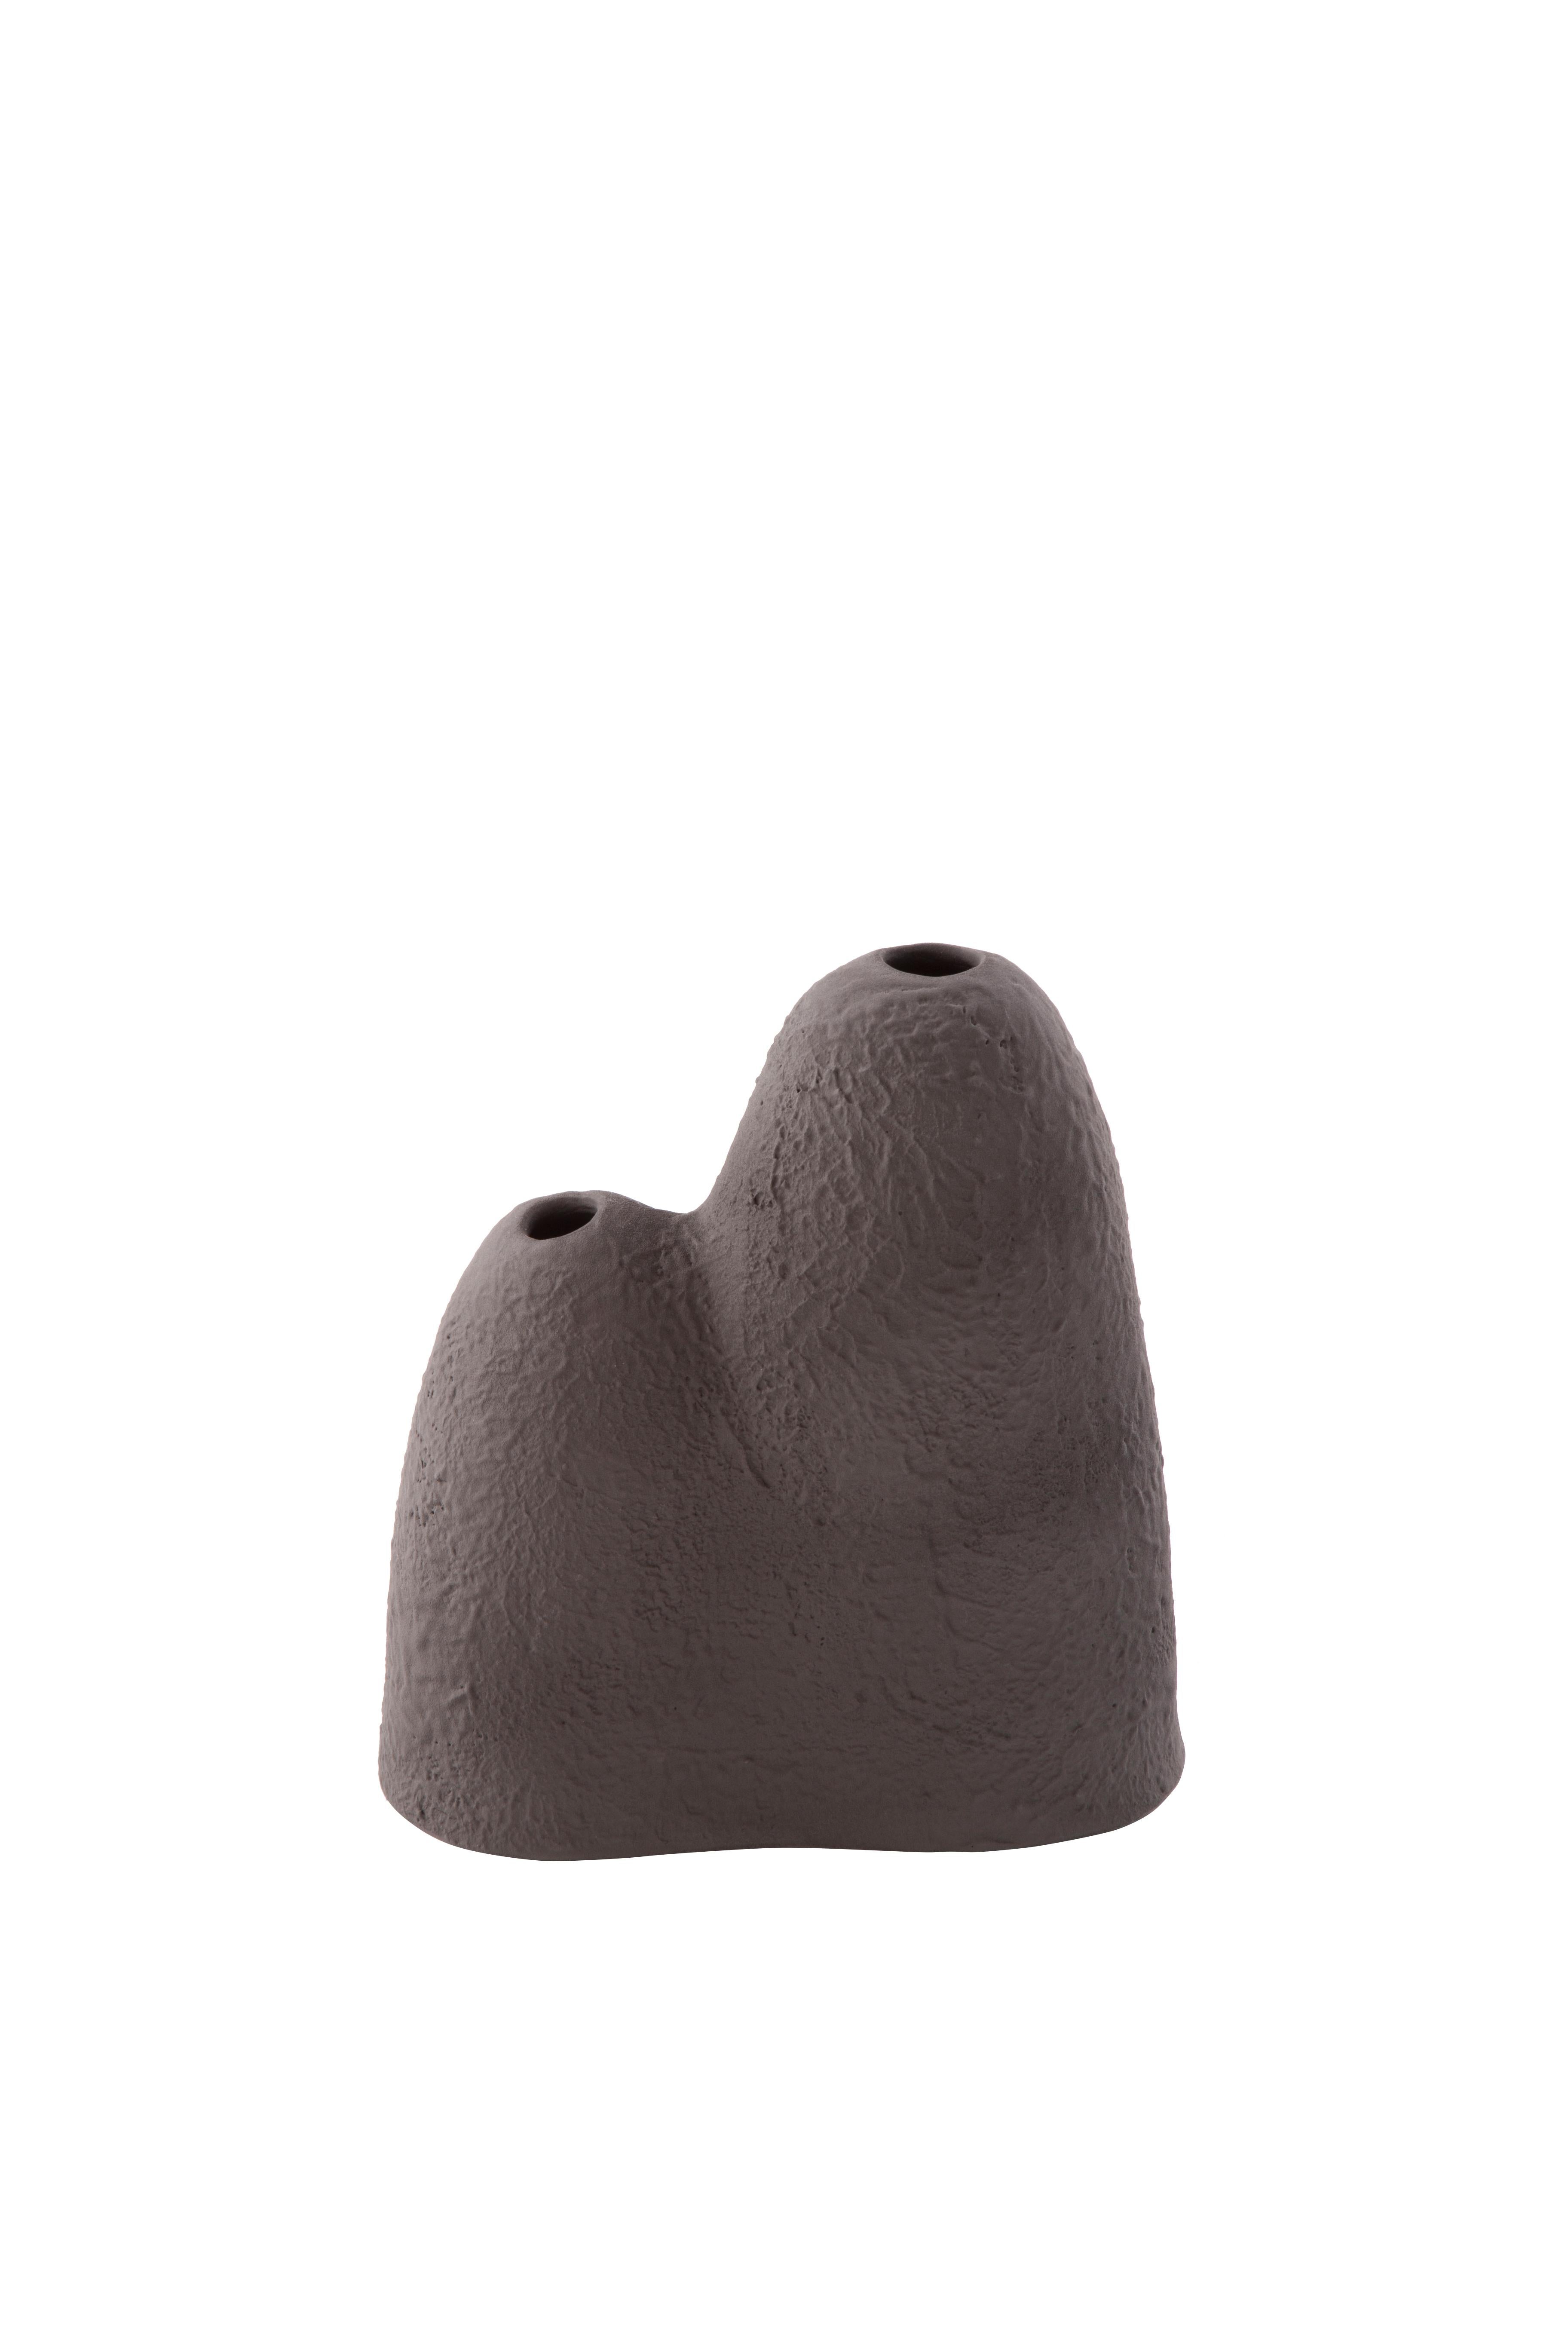 Mountain small umbra vase by Pulpo
Dimensions: D21 x W9 x H22 cm
Materials: ceramic

Also available in different colours. 

Making a dramatic entrance overtop your tablescape below comes the mountain vase. Its solid ceramic form presents the